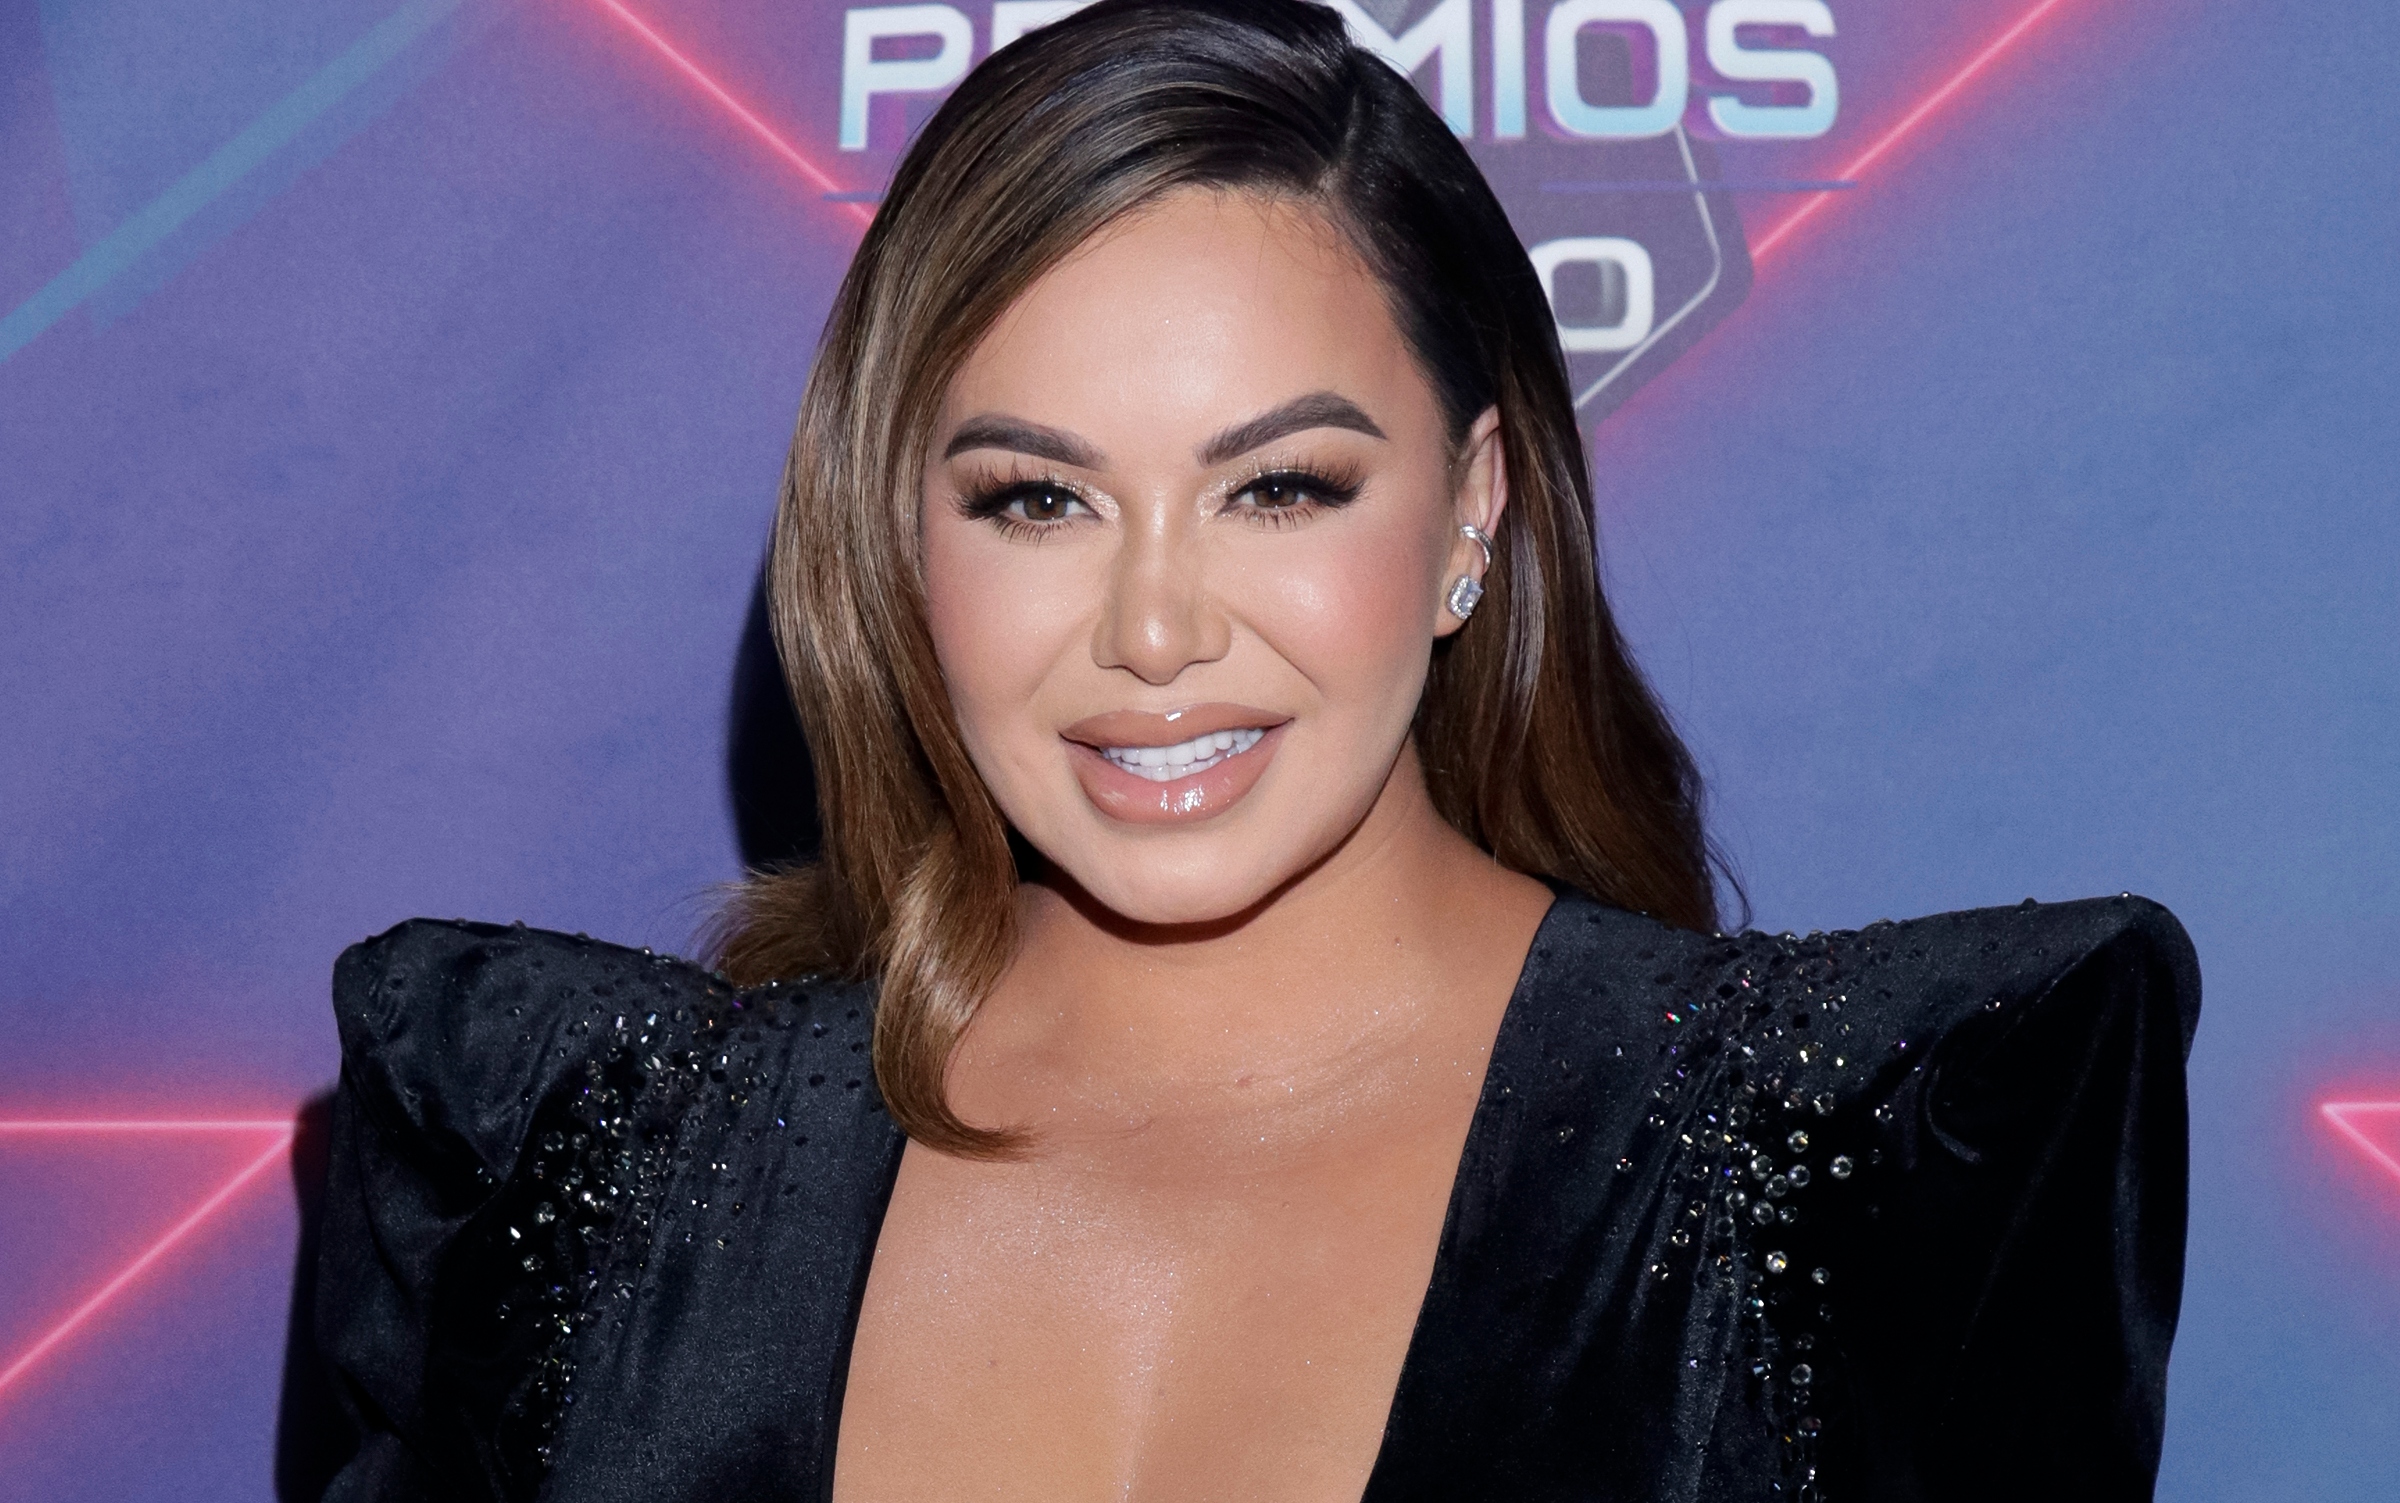 Chiquis Rivera Shows Off Her Curves On Stage Wearing A Tight Black 